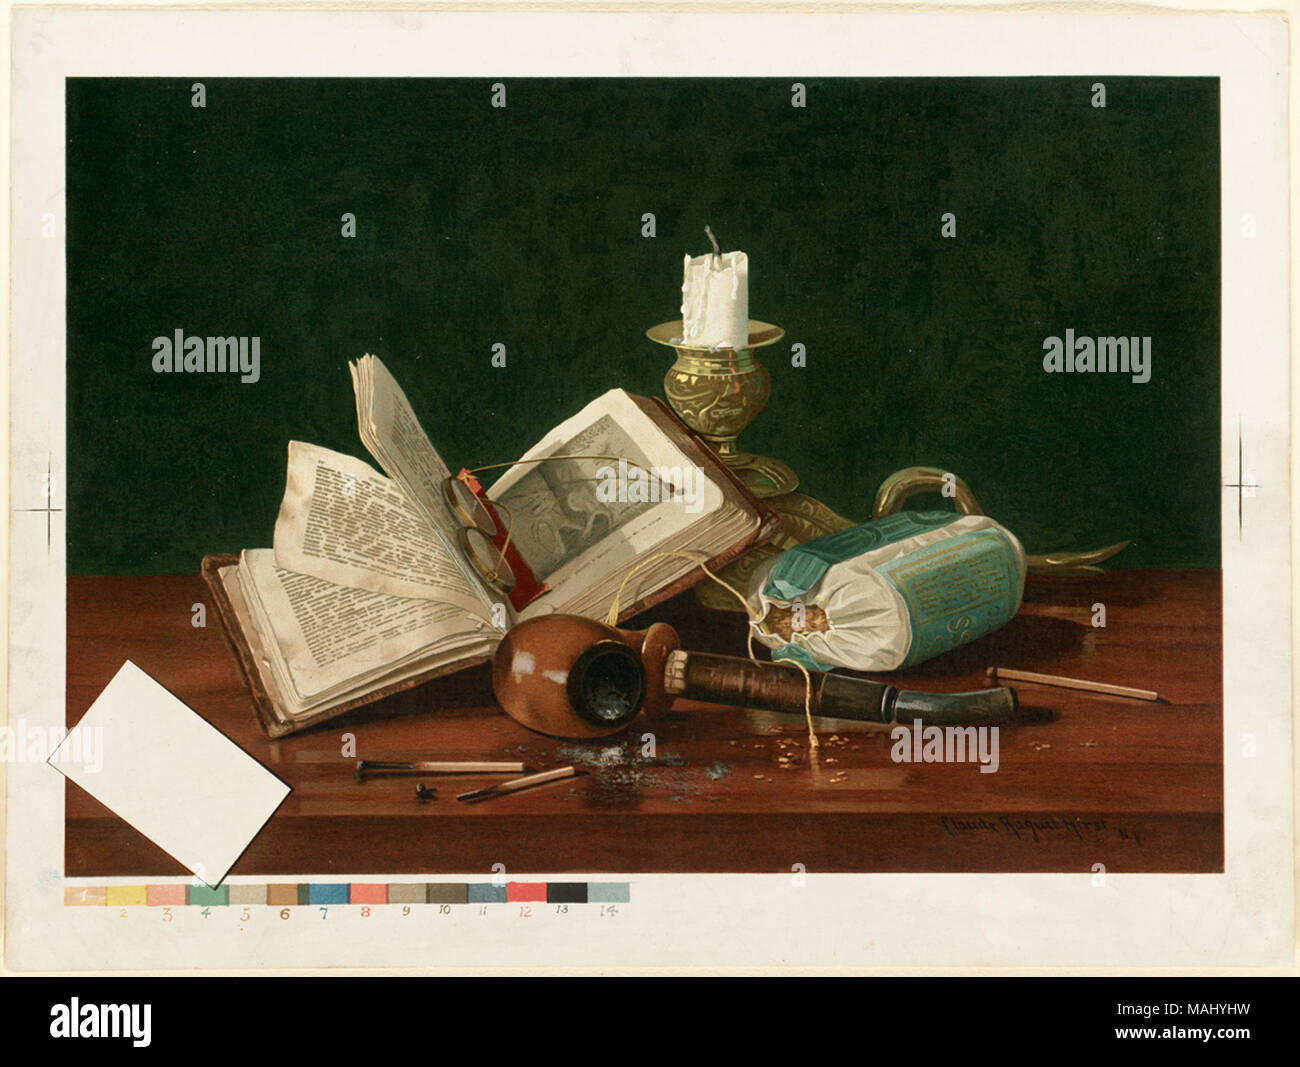 .  Advertisement for Roessle Brewing Co. Genre: Chromolithographs; Still life prints Location: Boston Public Library, Print Department Camera: Sinar AG Sinarback 54 FW, Sinar m Stock Photo